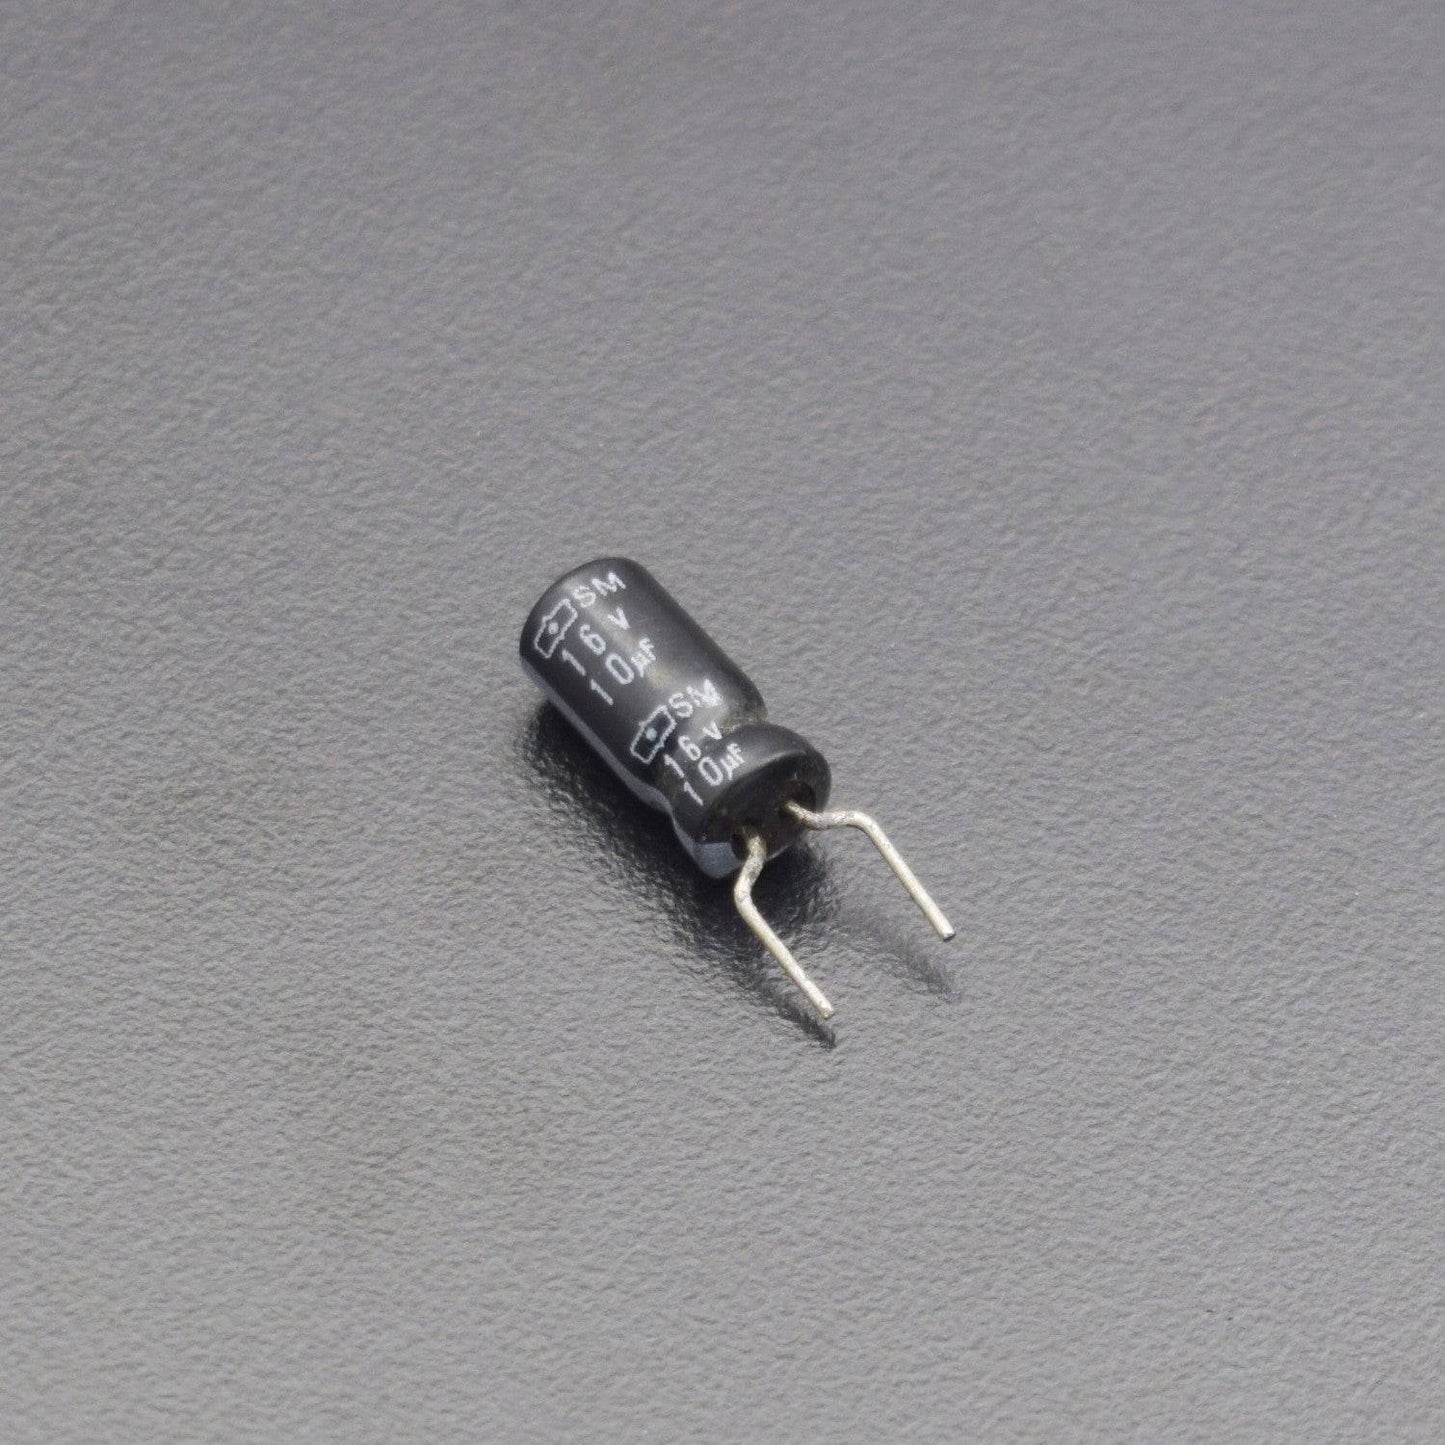 10uF 16V Mini Radial Electrolytic Capacitor - Pack of 5 - RS2102 - REES52